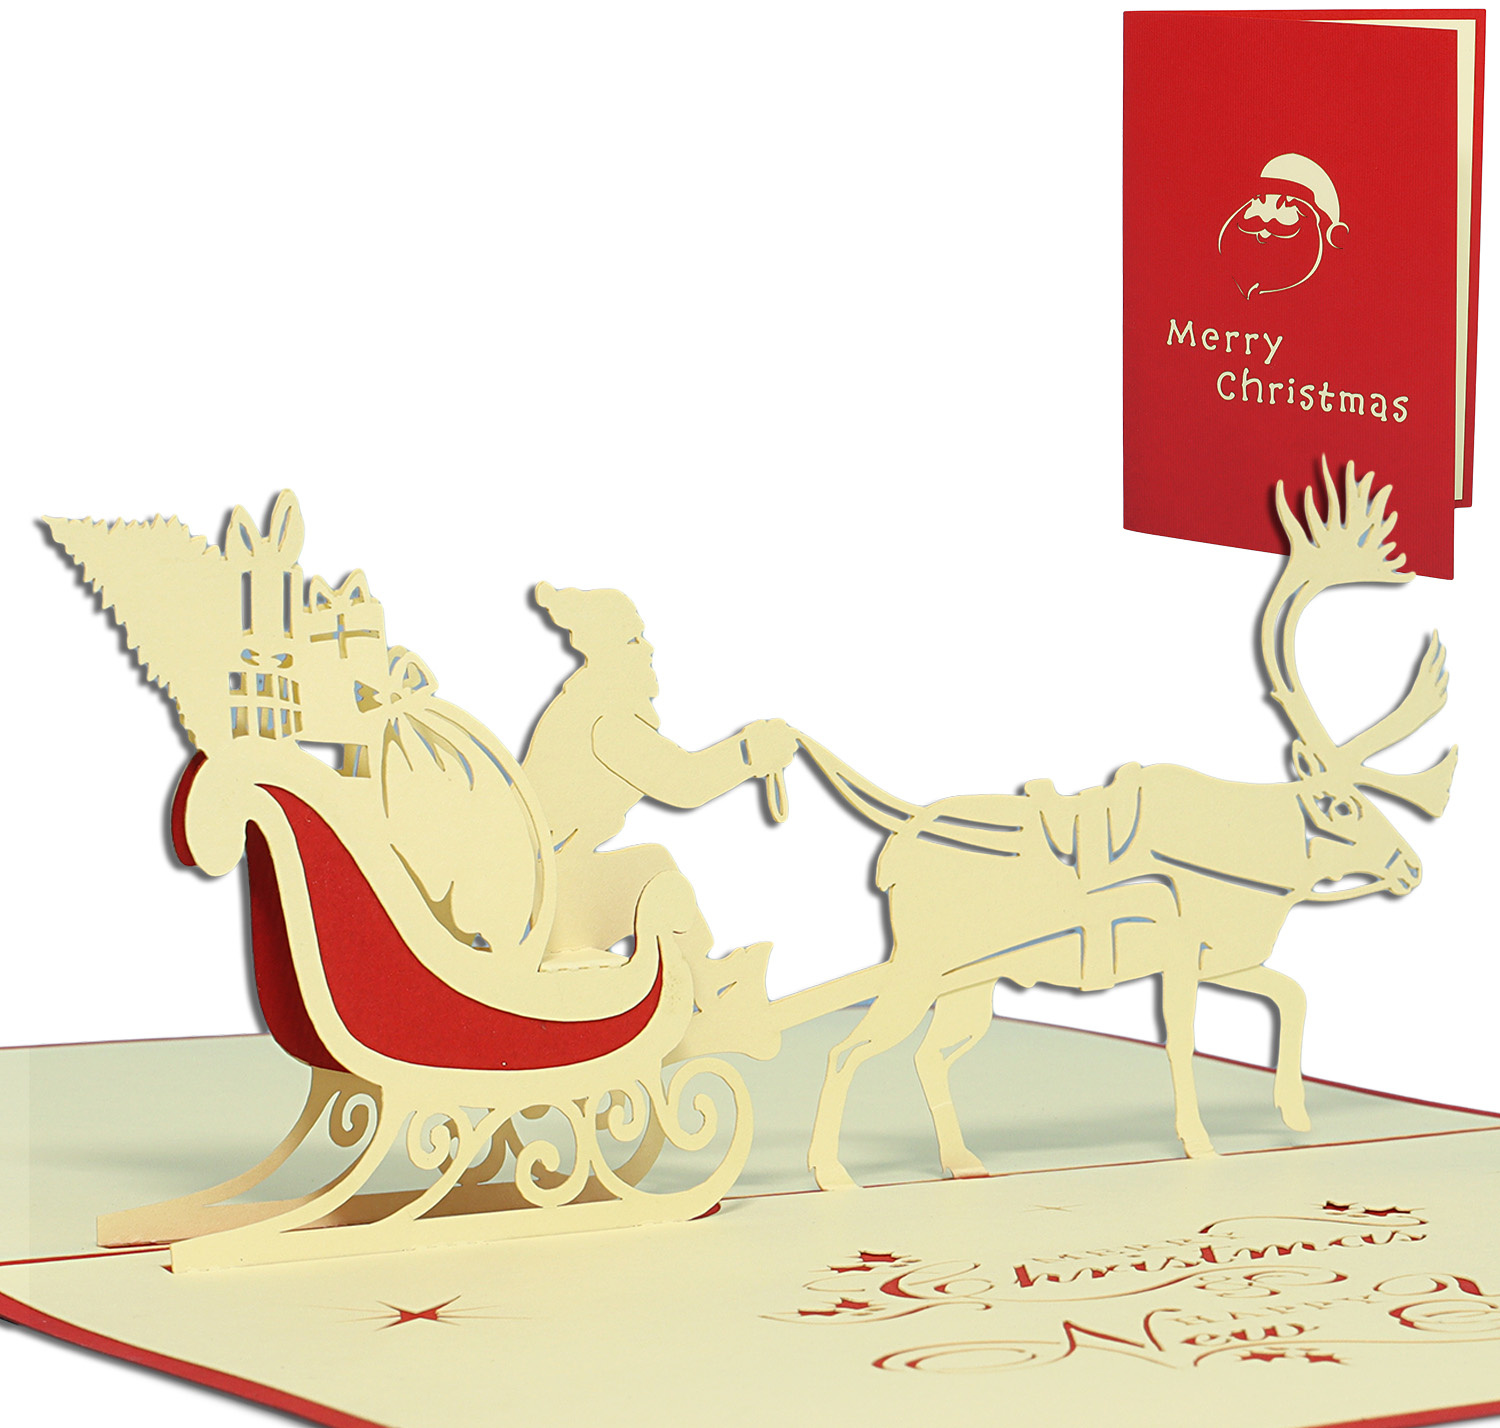 LINPOPUP Pop Up 3D Card, Christmas Card, Greeting Card, Father Christmas in Sleigh, LIN17828, LINPopUp®, N404